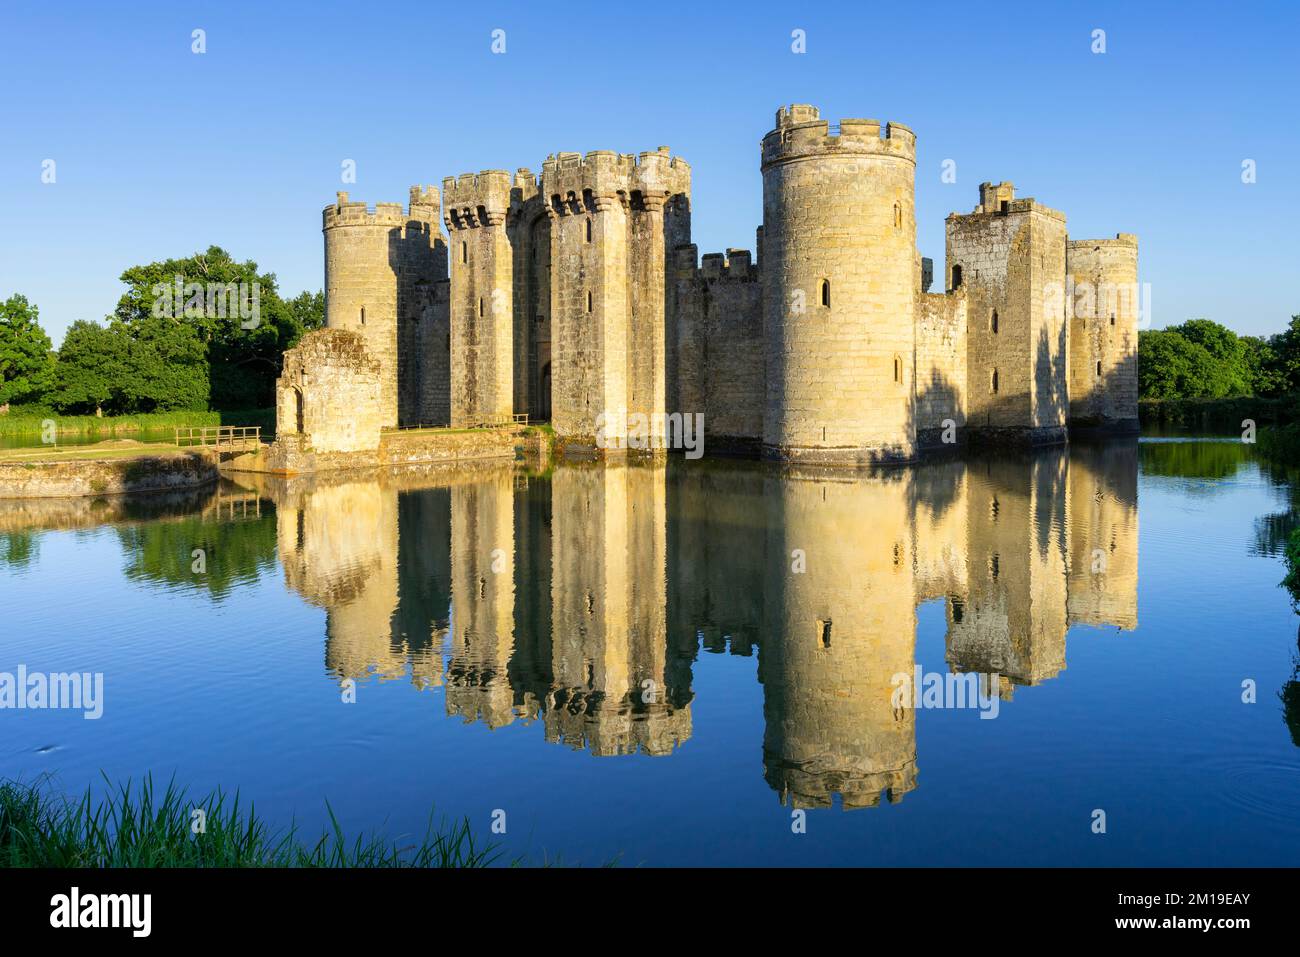 Bodiam Castle with perfect reflection in the moat - Bodiam Castle 14th-century moated castle Robertsbridge Bodiam East Sussex England UK GB Europe Stock Photo